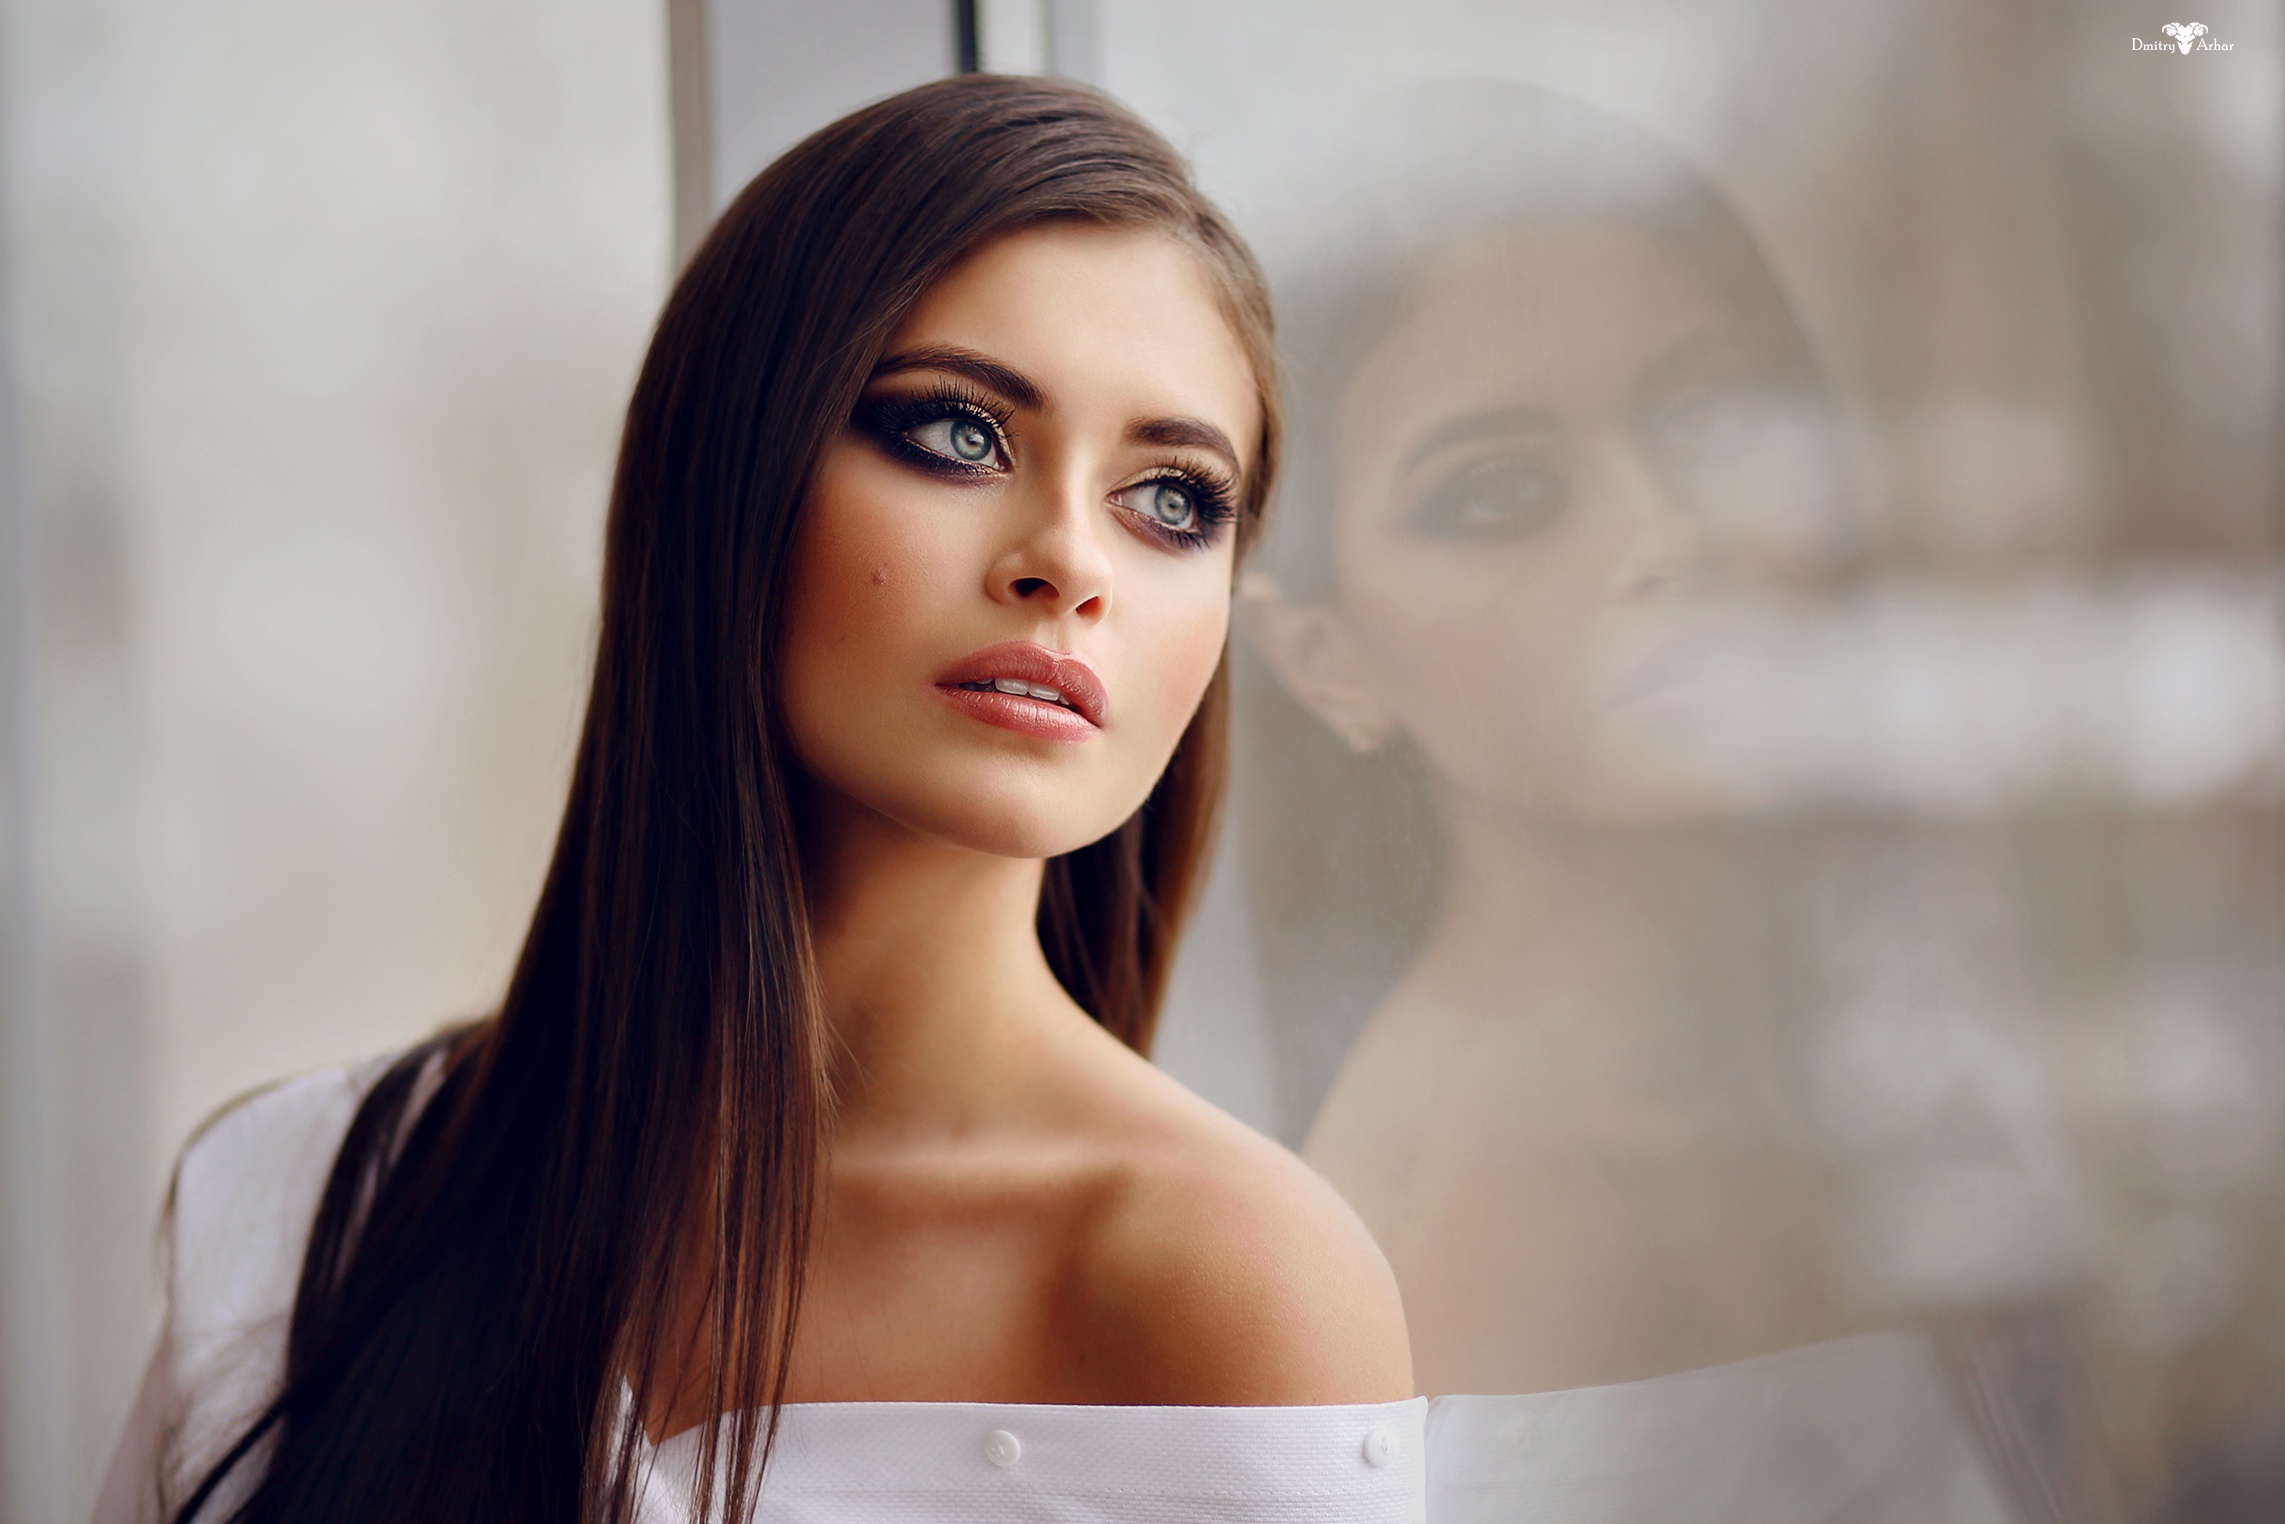 People 2285x1524 Dmitry Arhar long hair reflection makeup women model portrait brunette long eyelashes looking into the distance bare shoulders looking out window straight hair Alina closeup watermarked